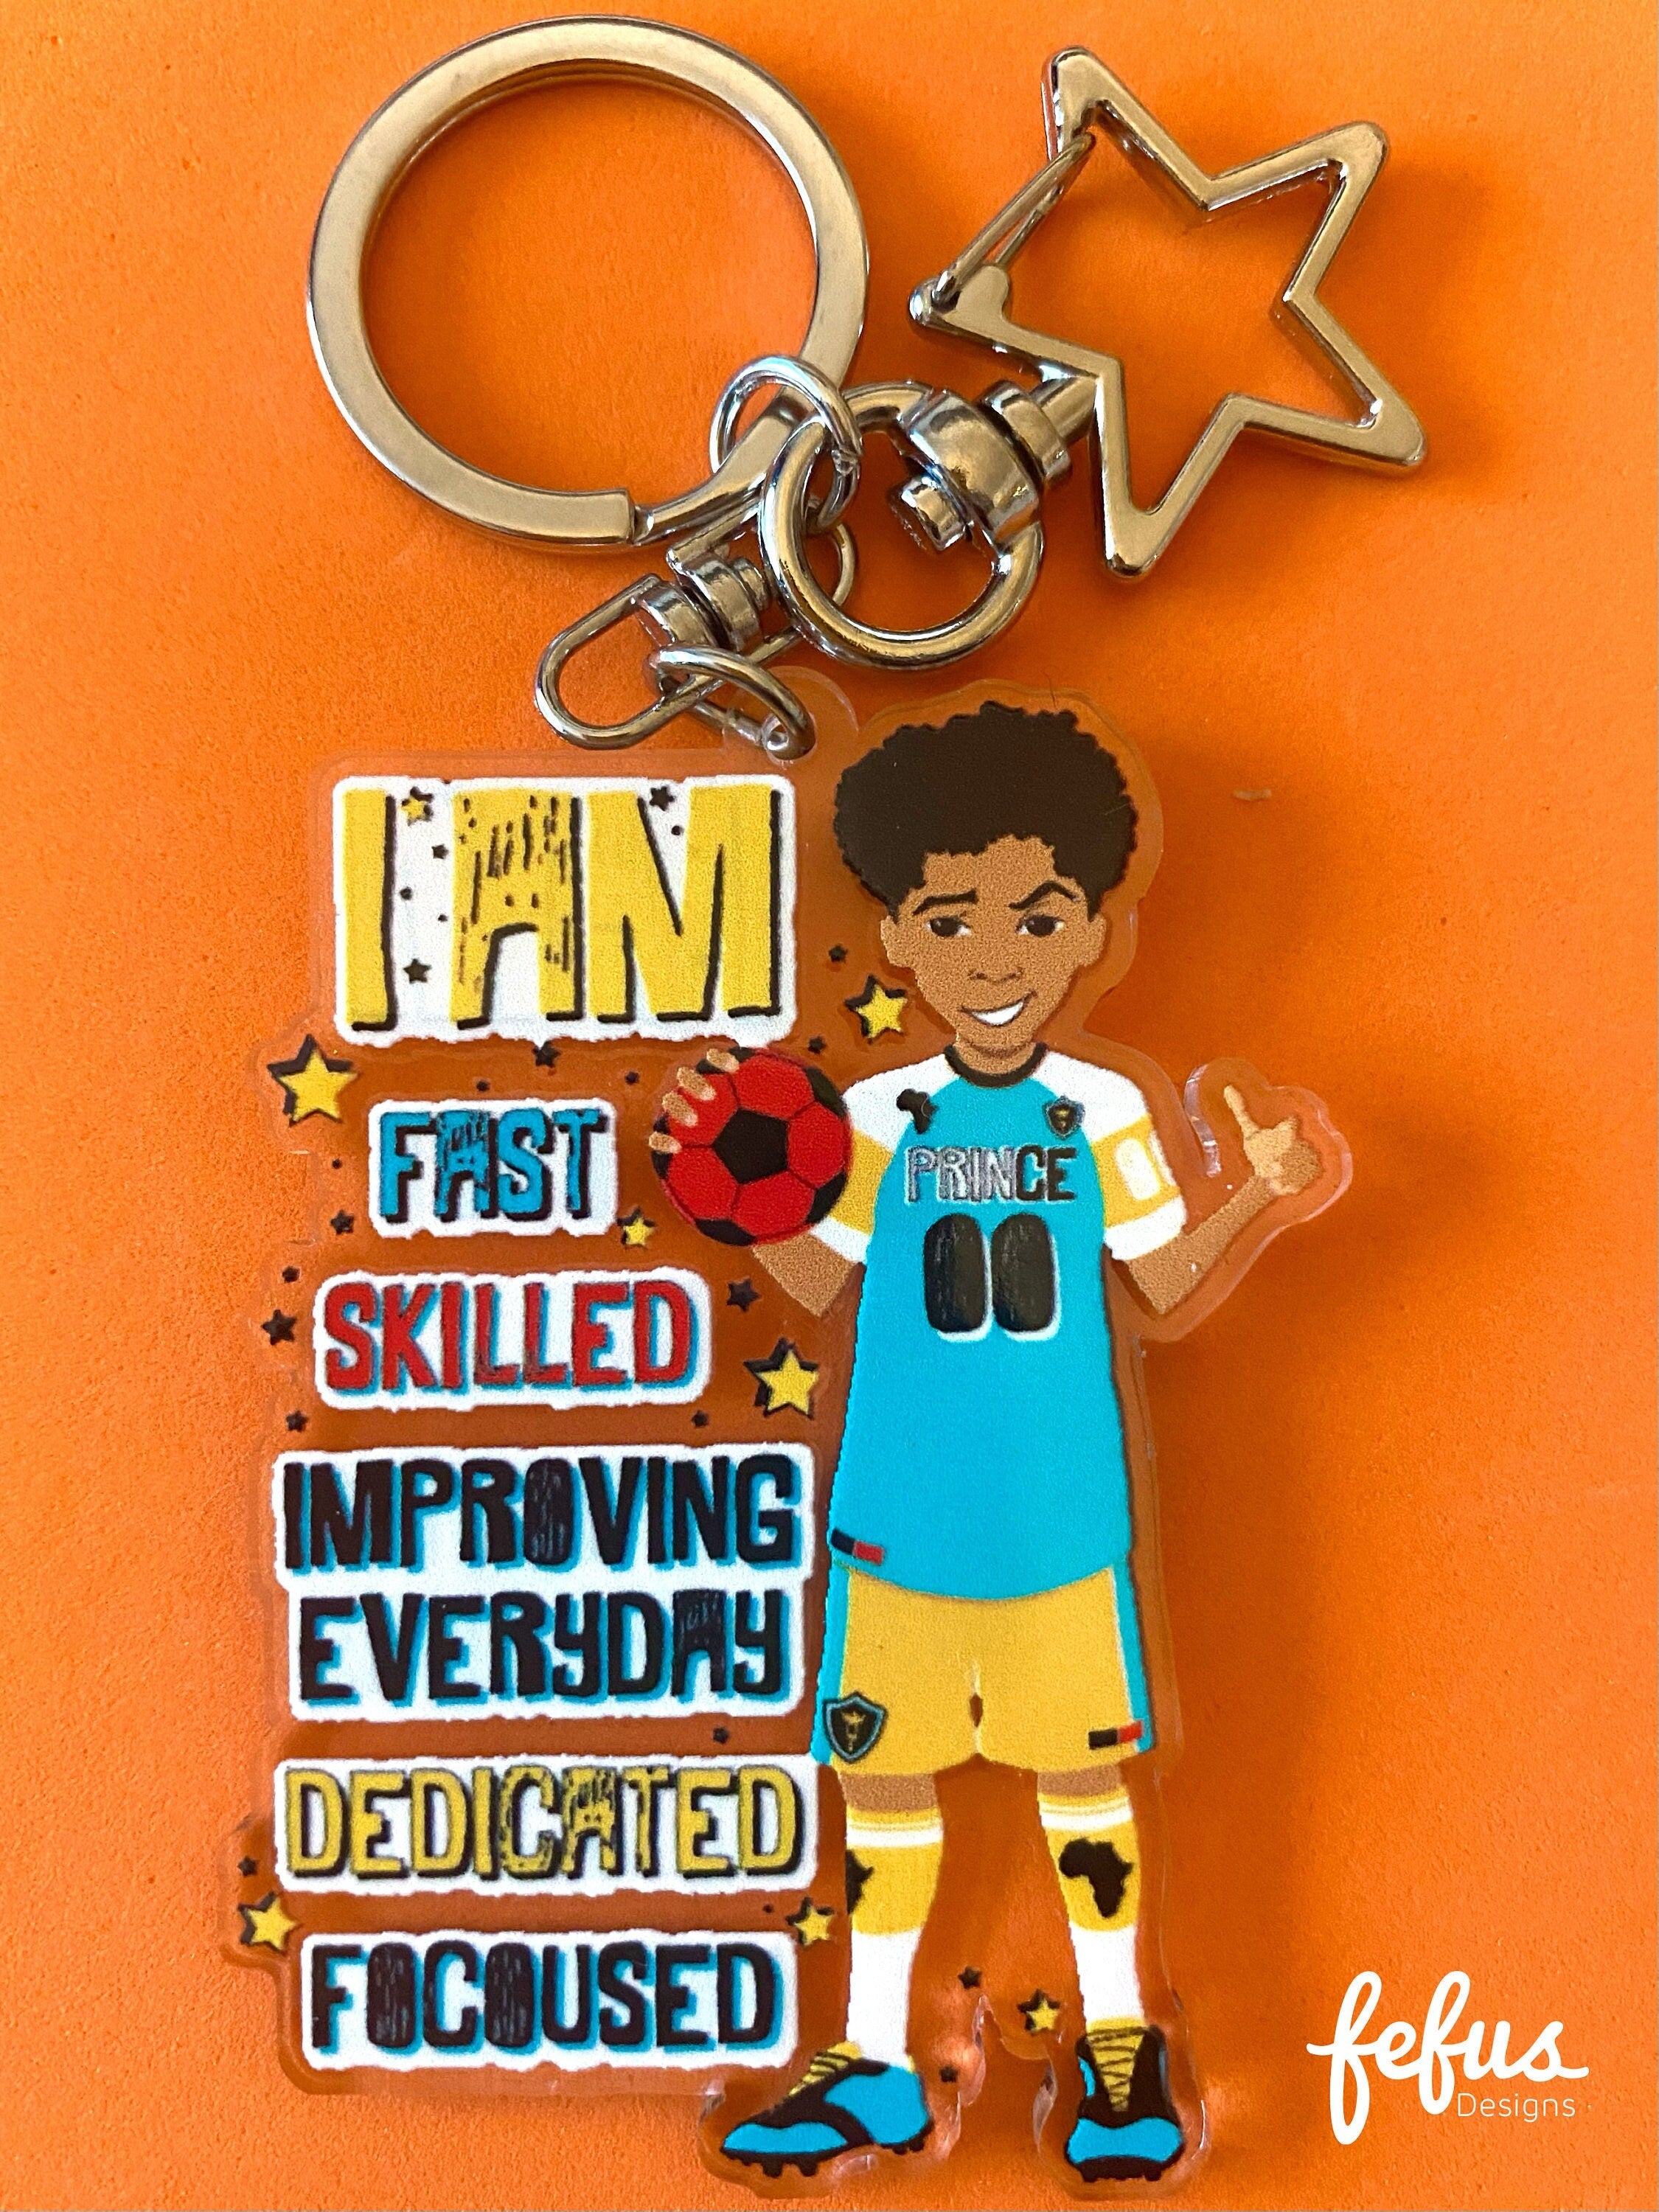 Double-sided Biracial Boy Footballer keychain made from clear acrylic. Perfect for young athletes to show their love for football and celebrate diversity. (63.5mm diameter)